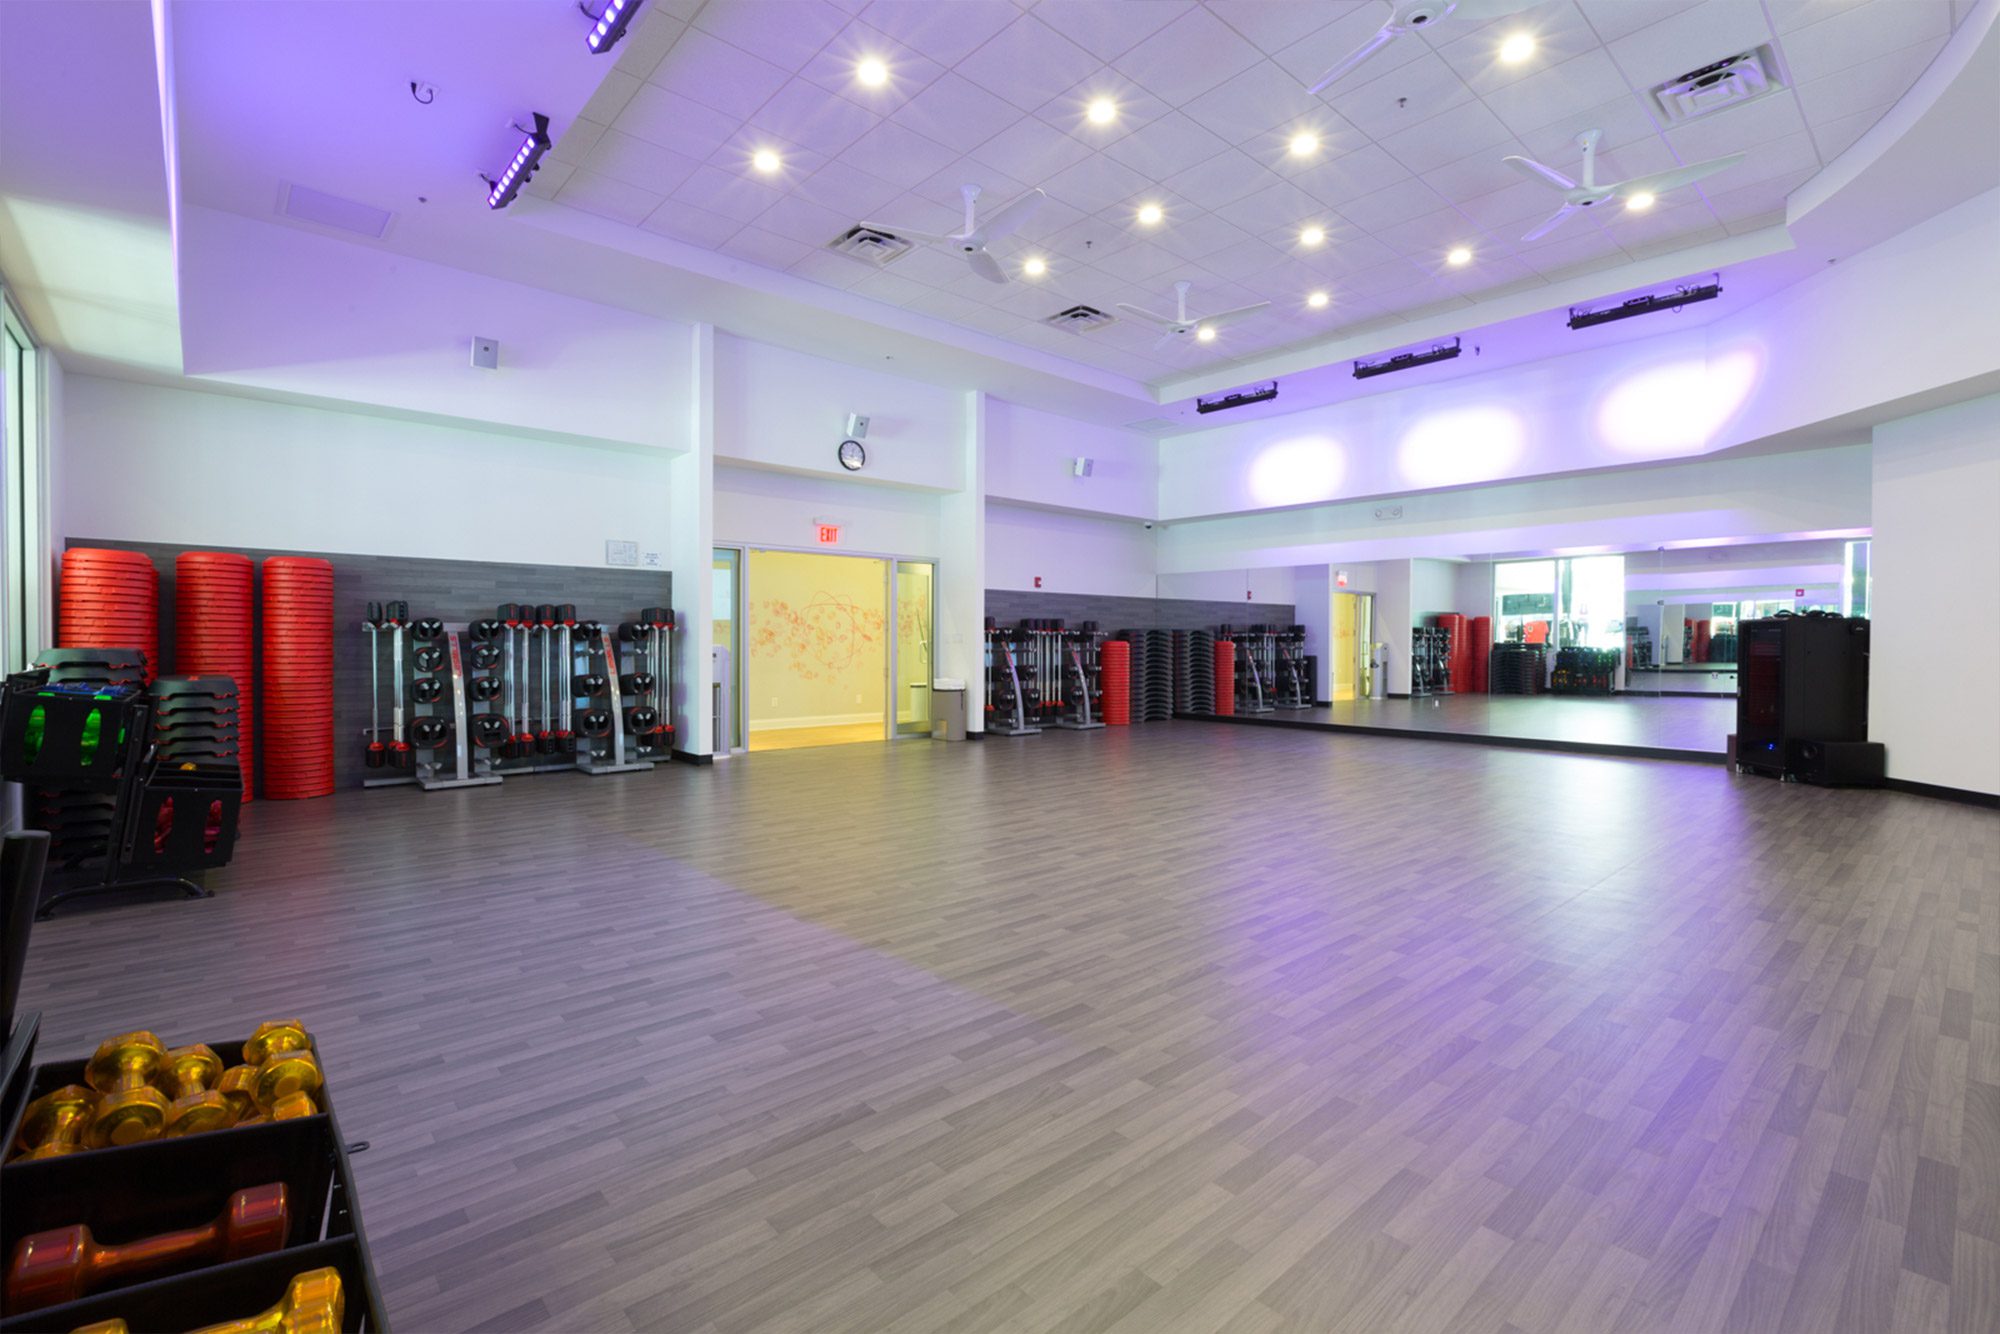 From gyms like Fitness Hub (one of our BRITTO CHARETTE designs) to juice bars and plant-based restaurants, you’ll find a plethora of healthy options in South Florida.